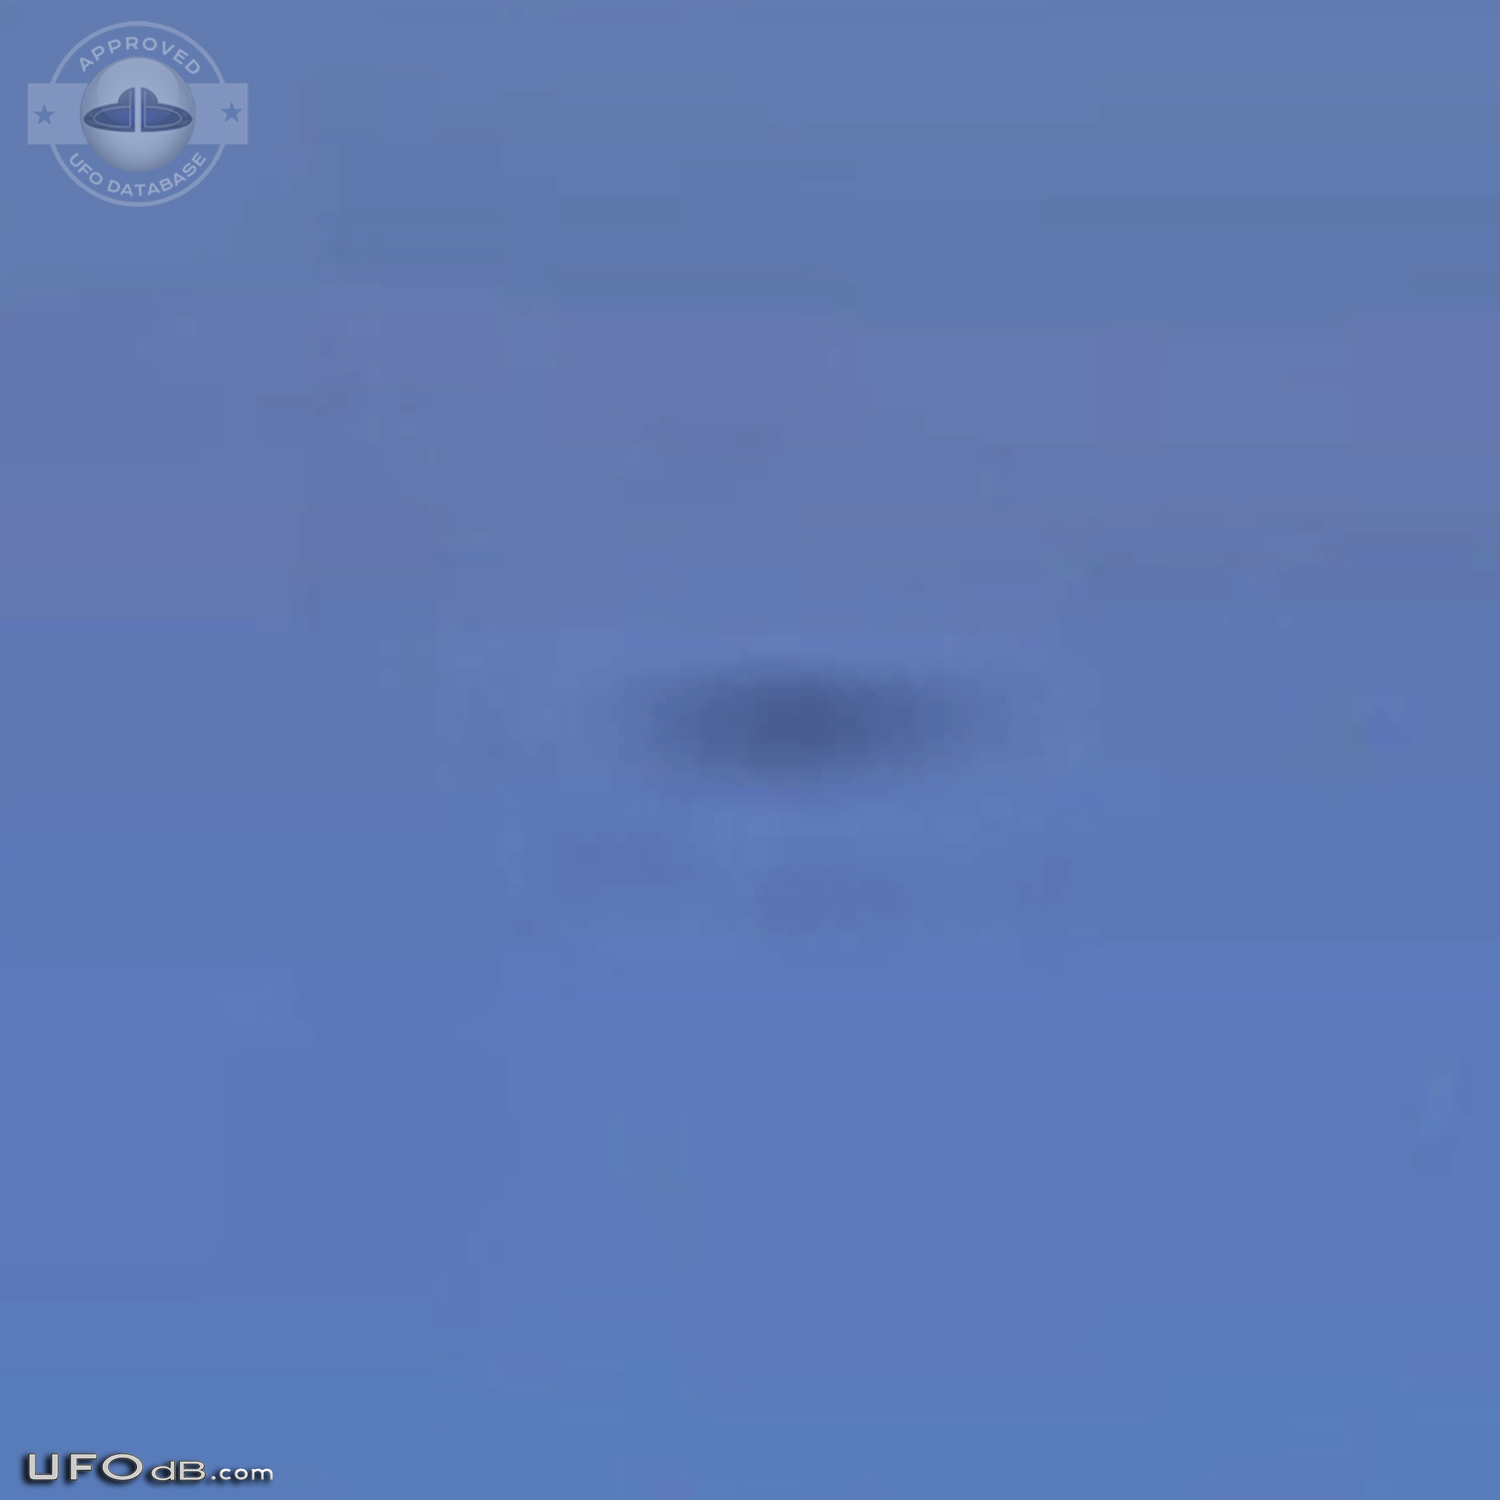 Large 70 meters wide UFO caught on picture - Cordoba, Argentina - 2009 UFO Picture #369-5